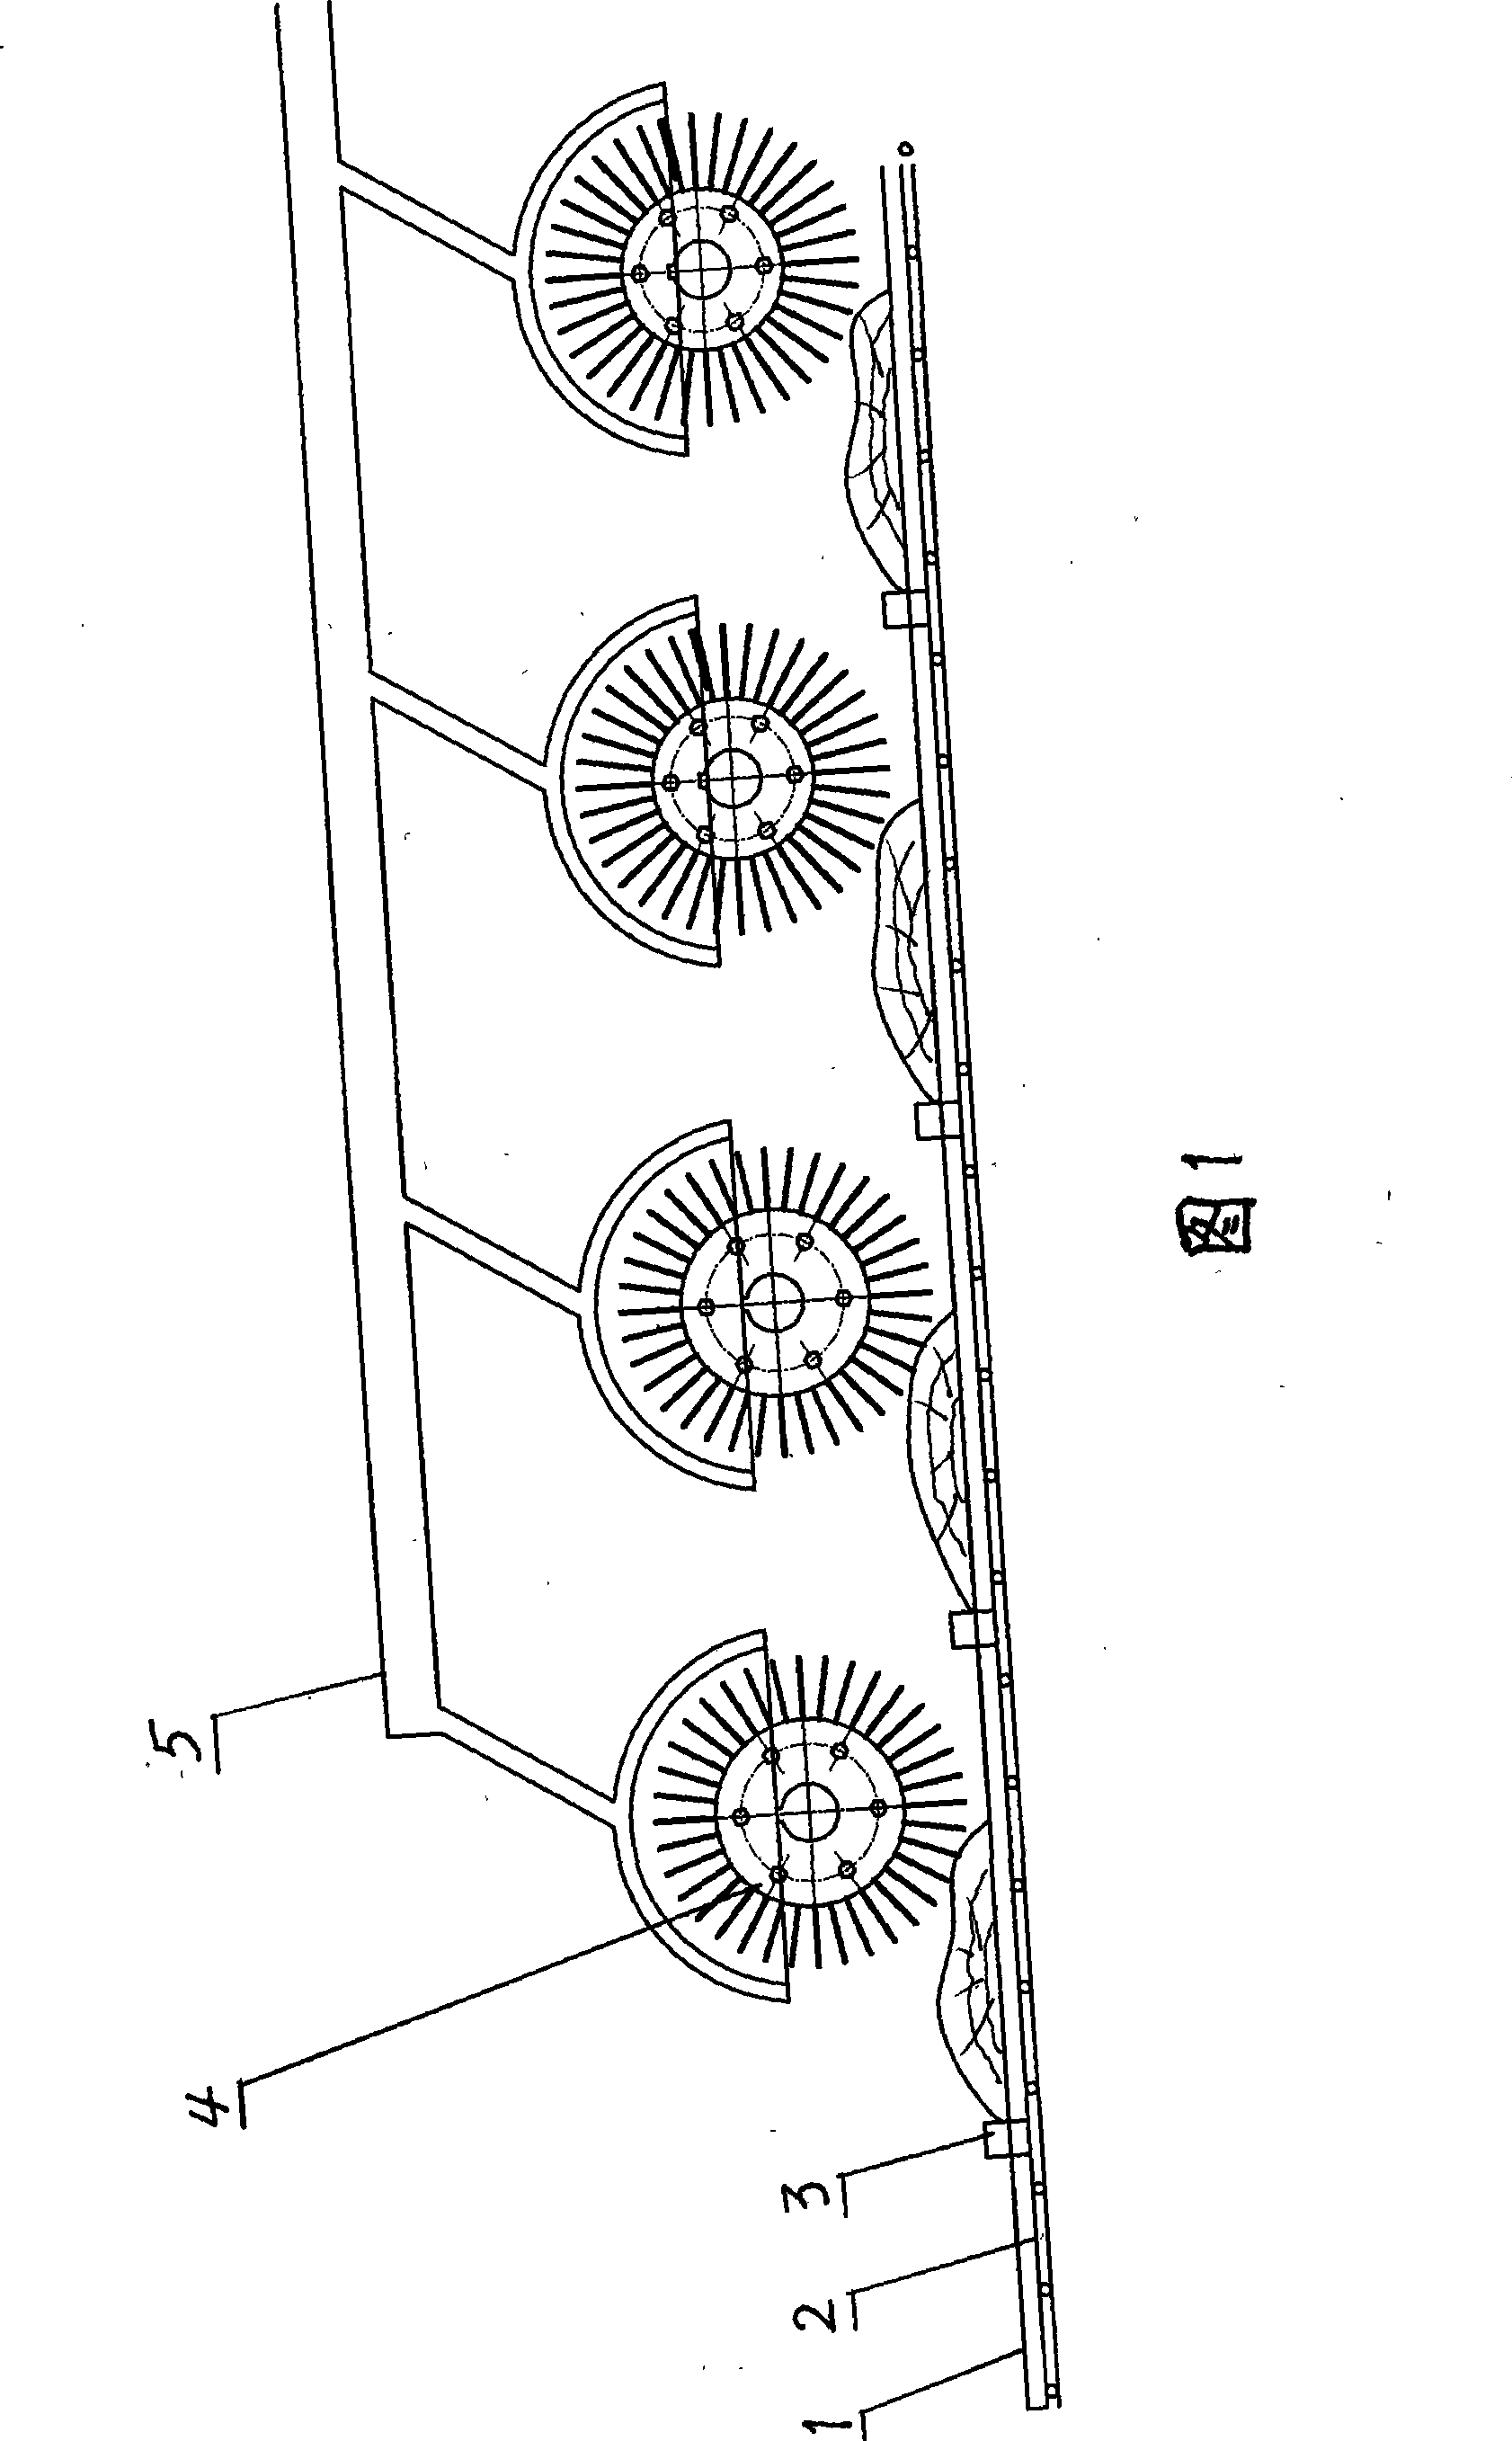 Method and device for transverse feeding removing wood side plate tegument